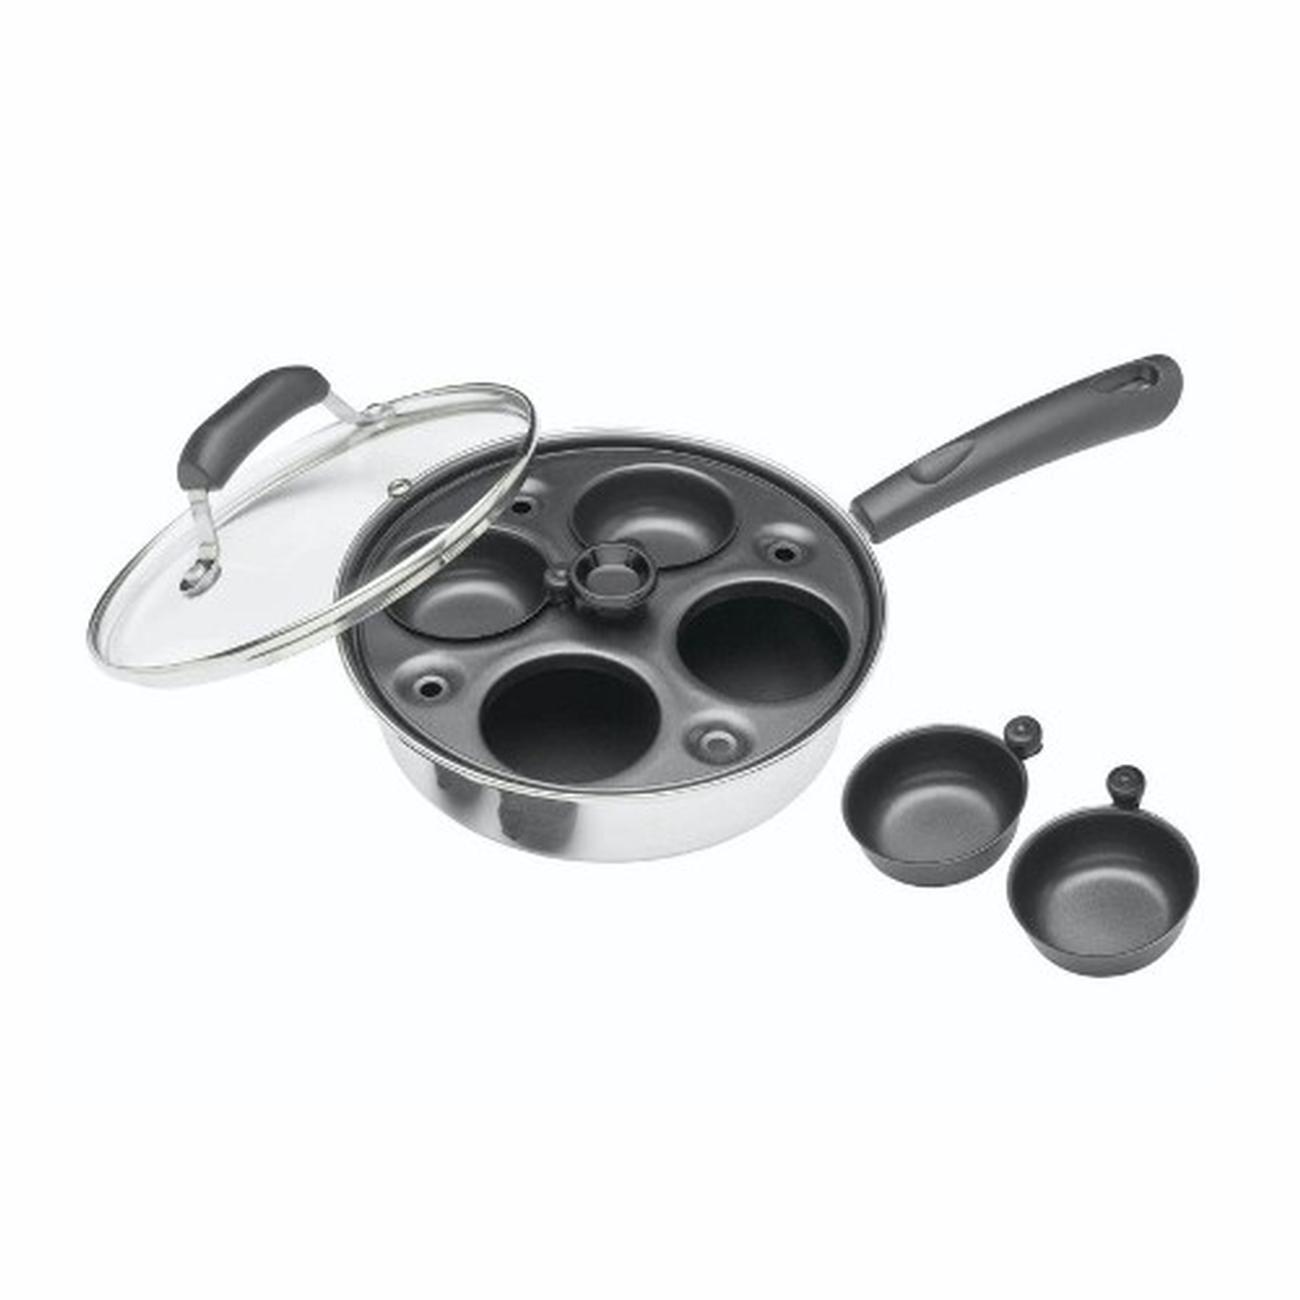 https://www.thekitchenwhisk.ie/contentFiles/productImages/Large/kitchencraft-carbon-steel-4-hole-egg-poacher1.jpg